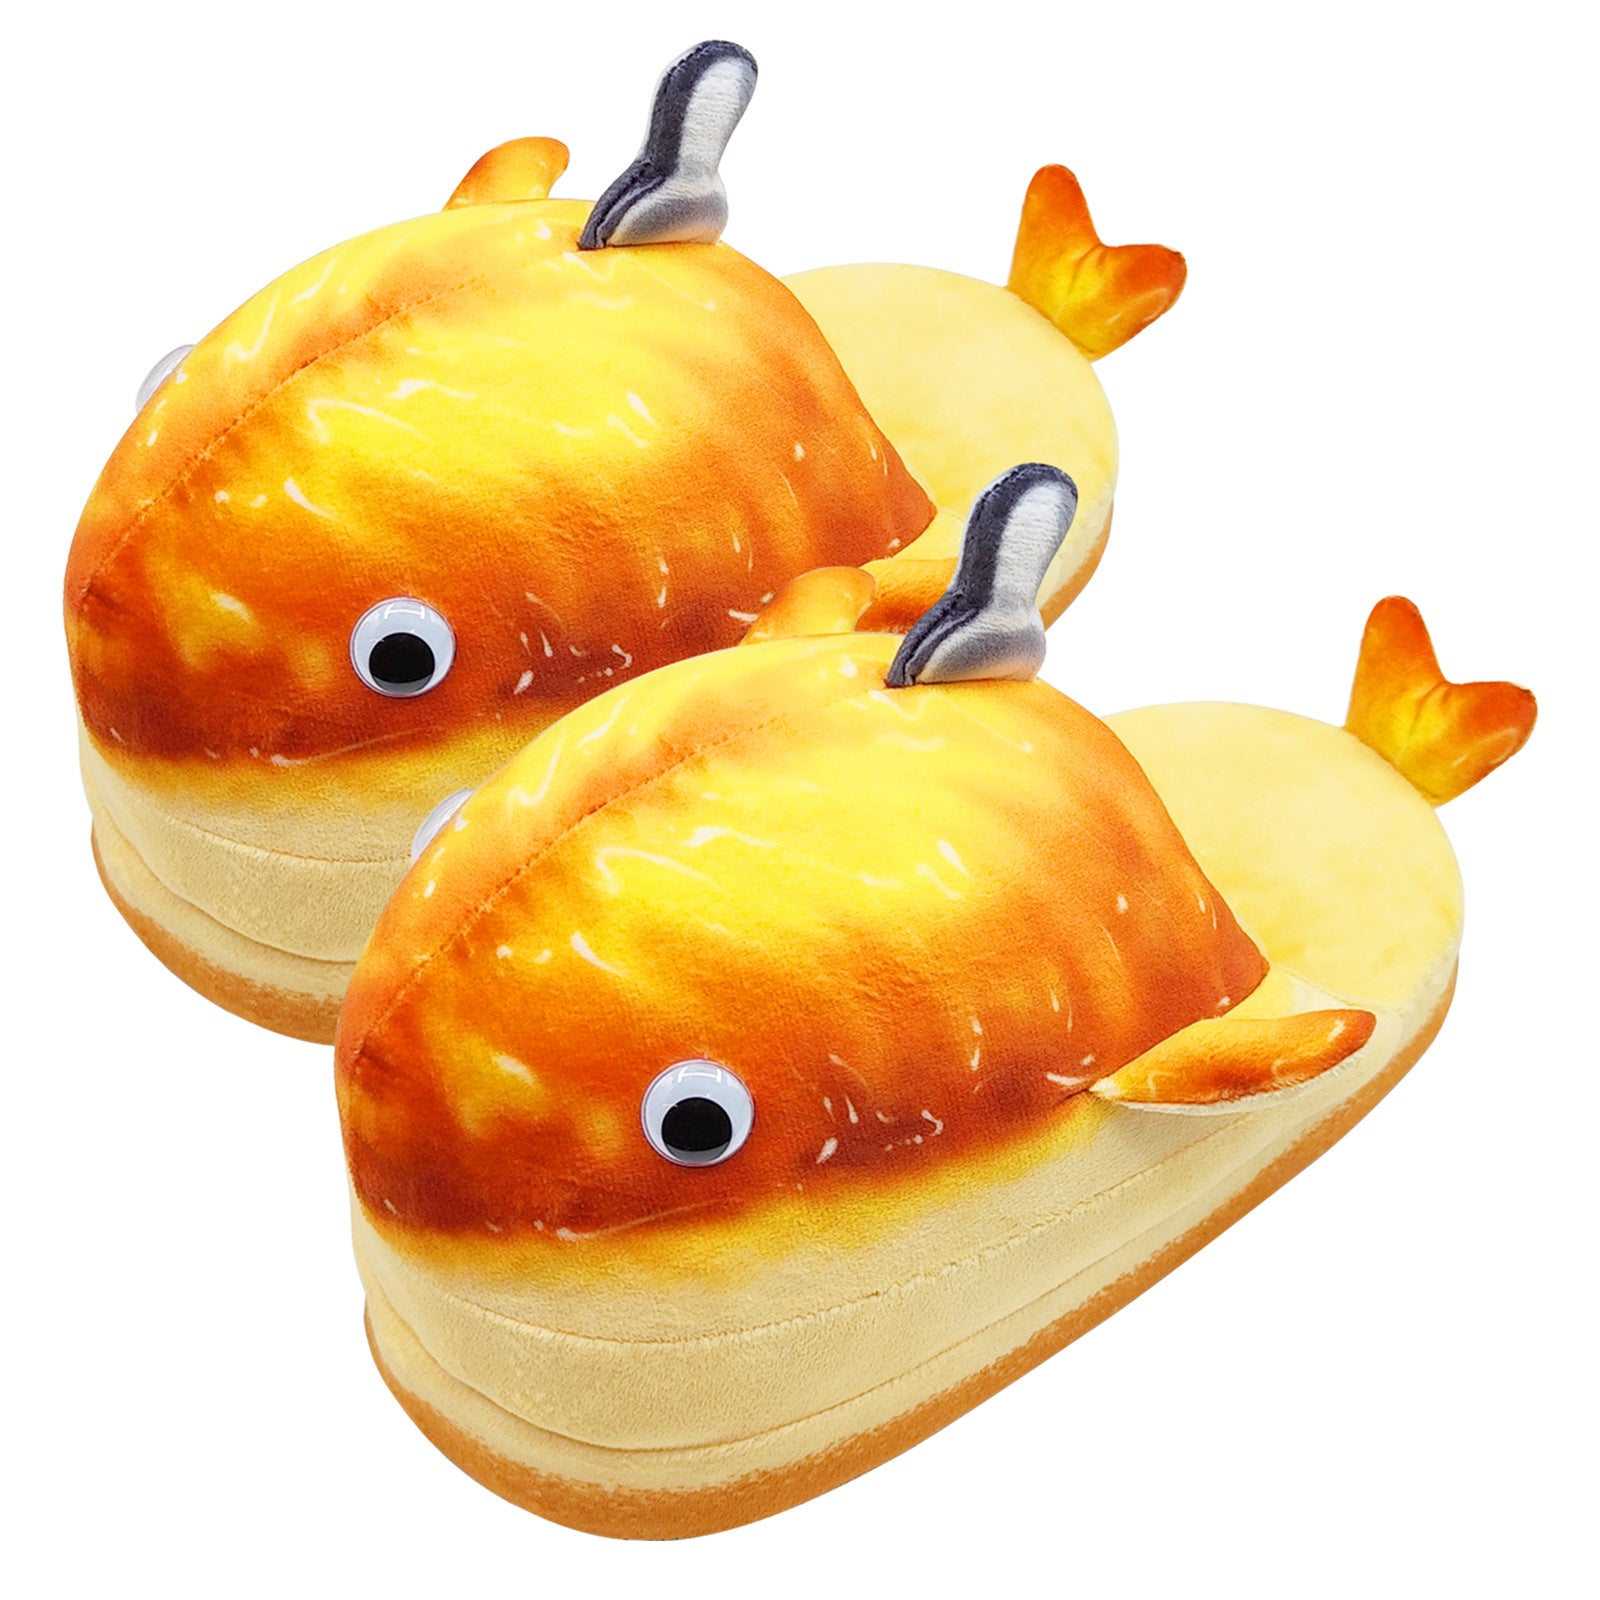 Marine Animals Whale Food Plush Slipper Carton Plush Shoes For Adult Winter Warm Cozy Fluffy House Slippers